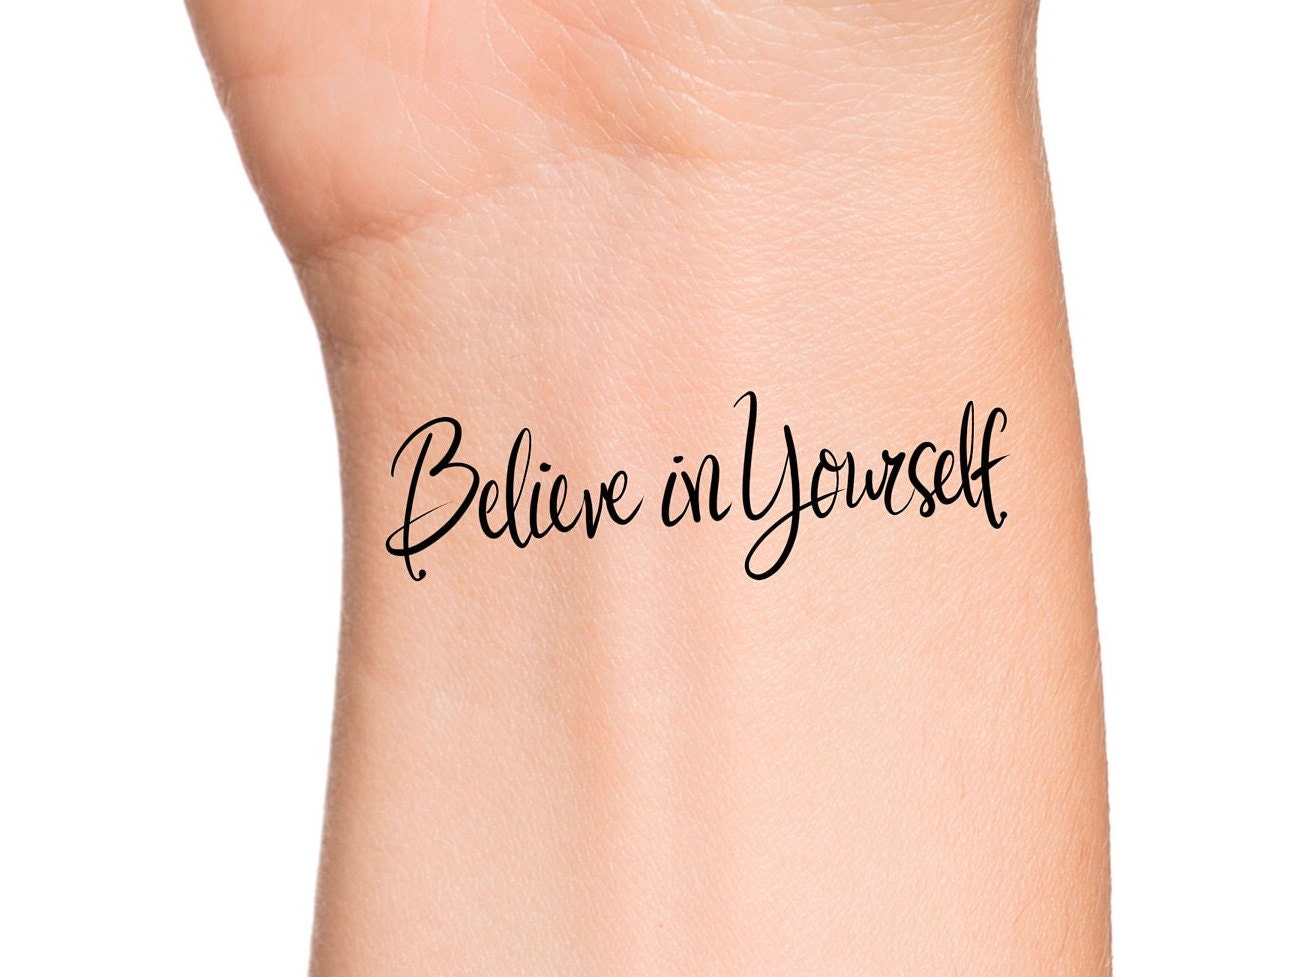 Tattoo that says believe in yourself located on the